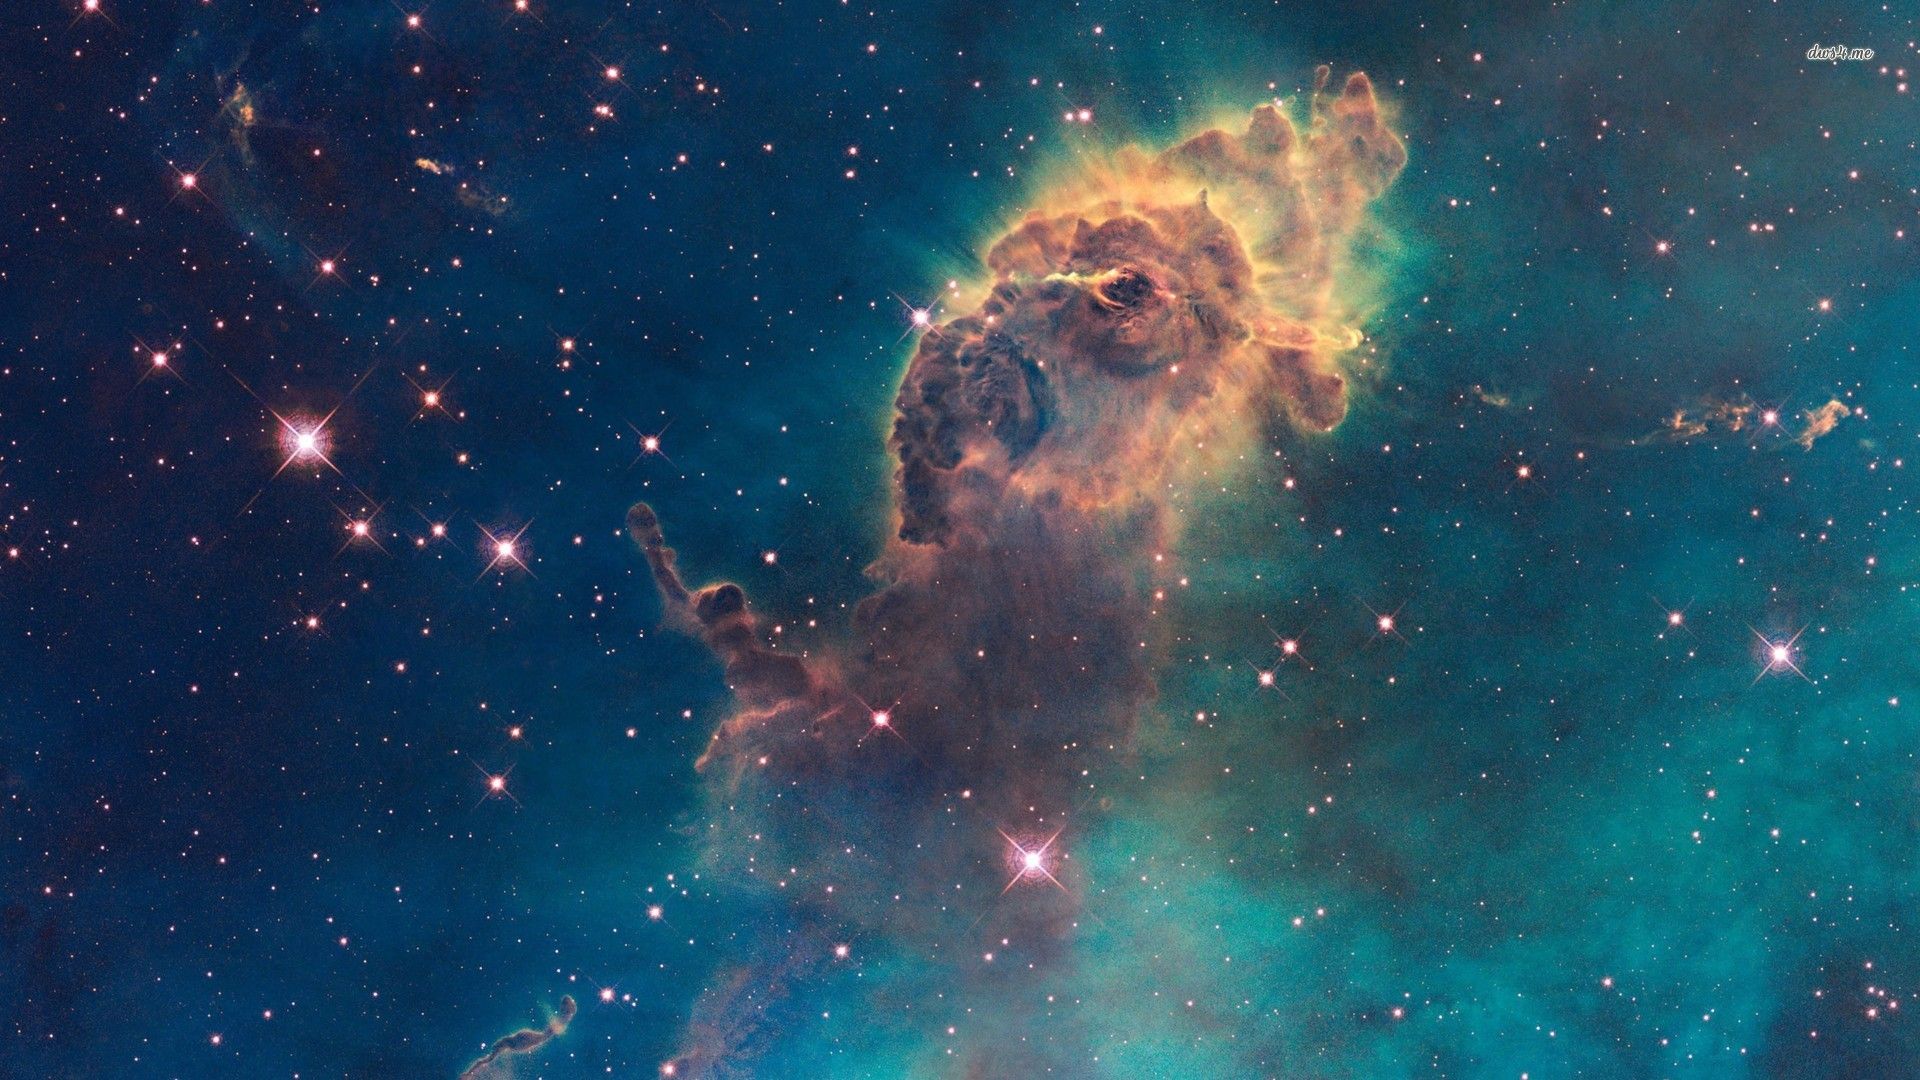 Nebula Gallery of Wallpaper. Free Download For Android